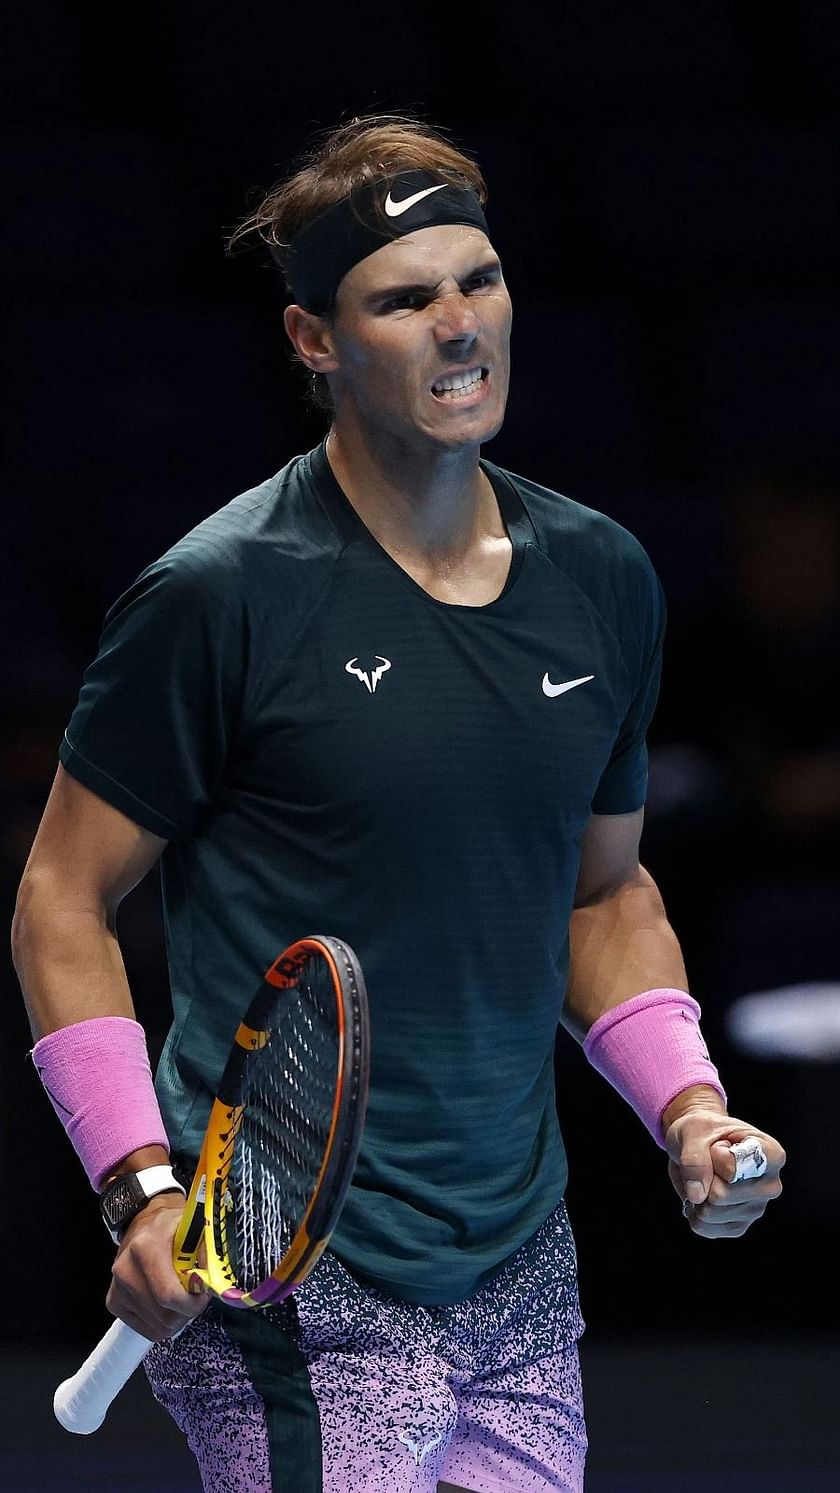 ATP Finals Day 1 as it happened- Nadal and Thiem start with wins